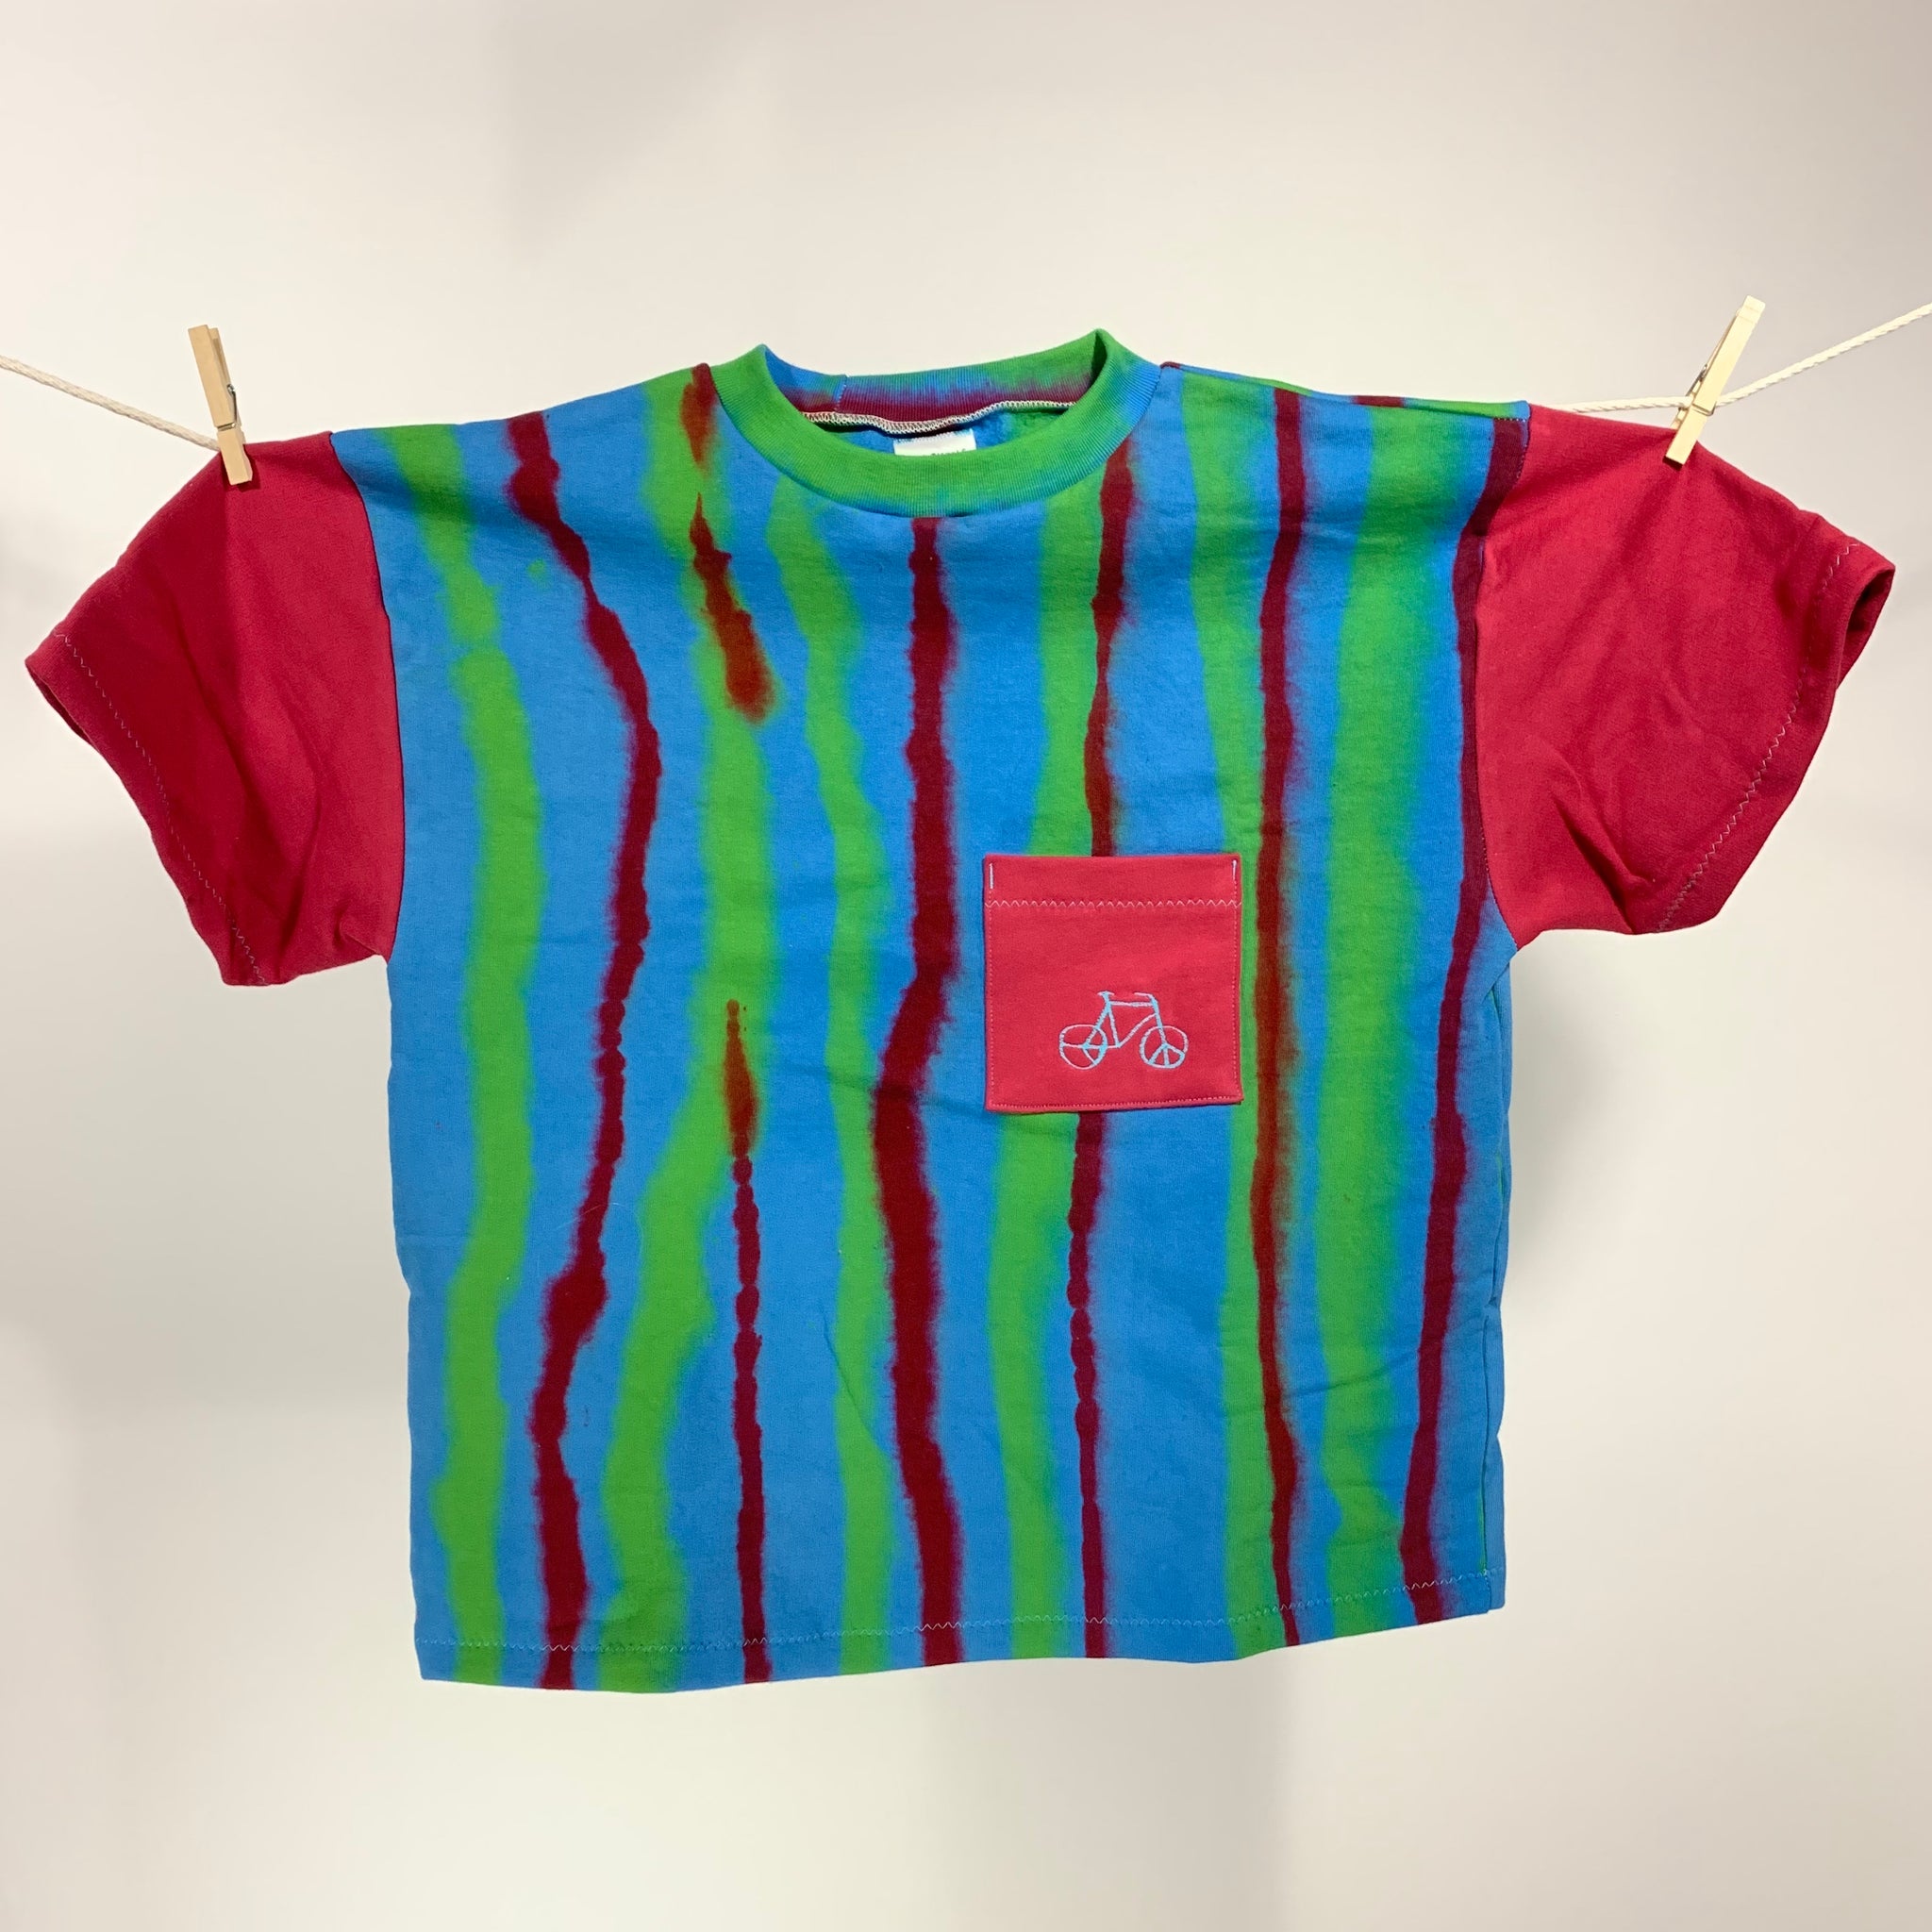 Home sewn boxy sweatshirt tee - embroidered and dyed - L